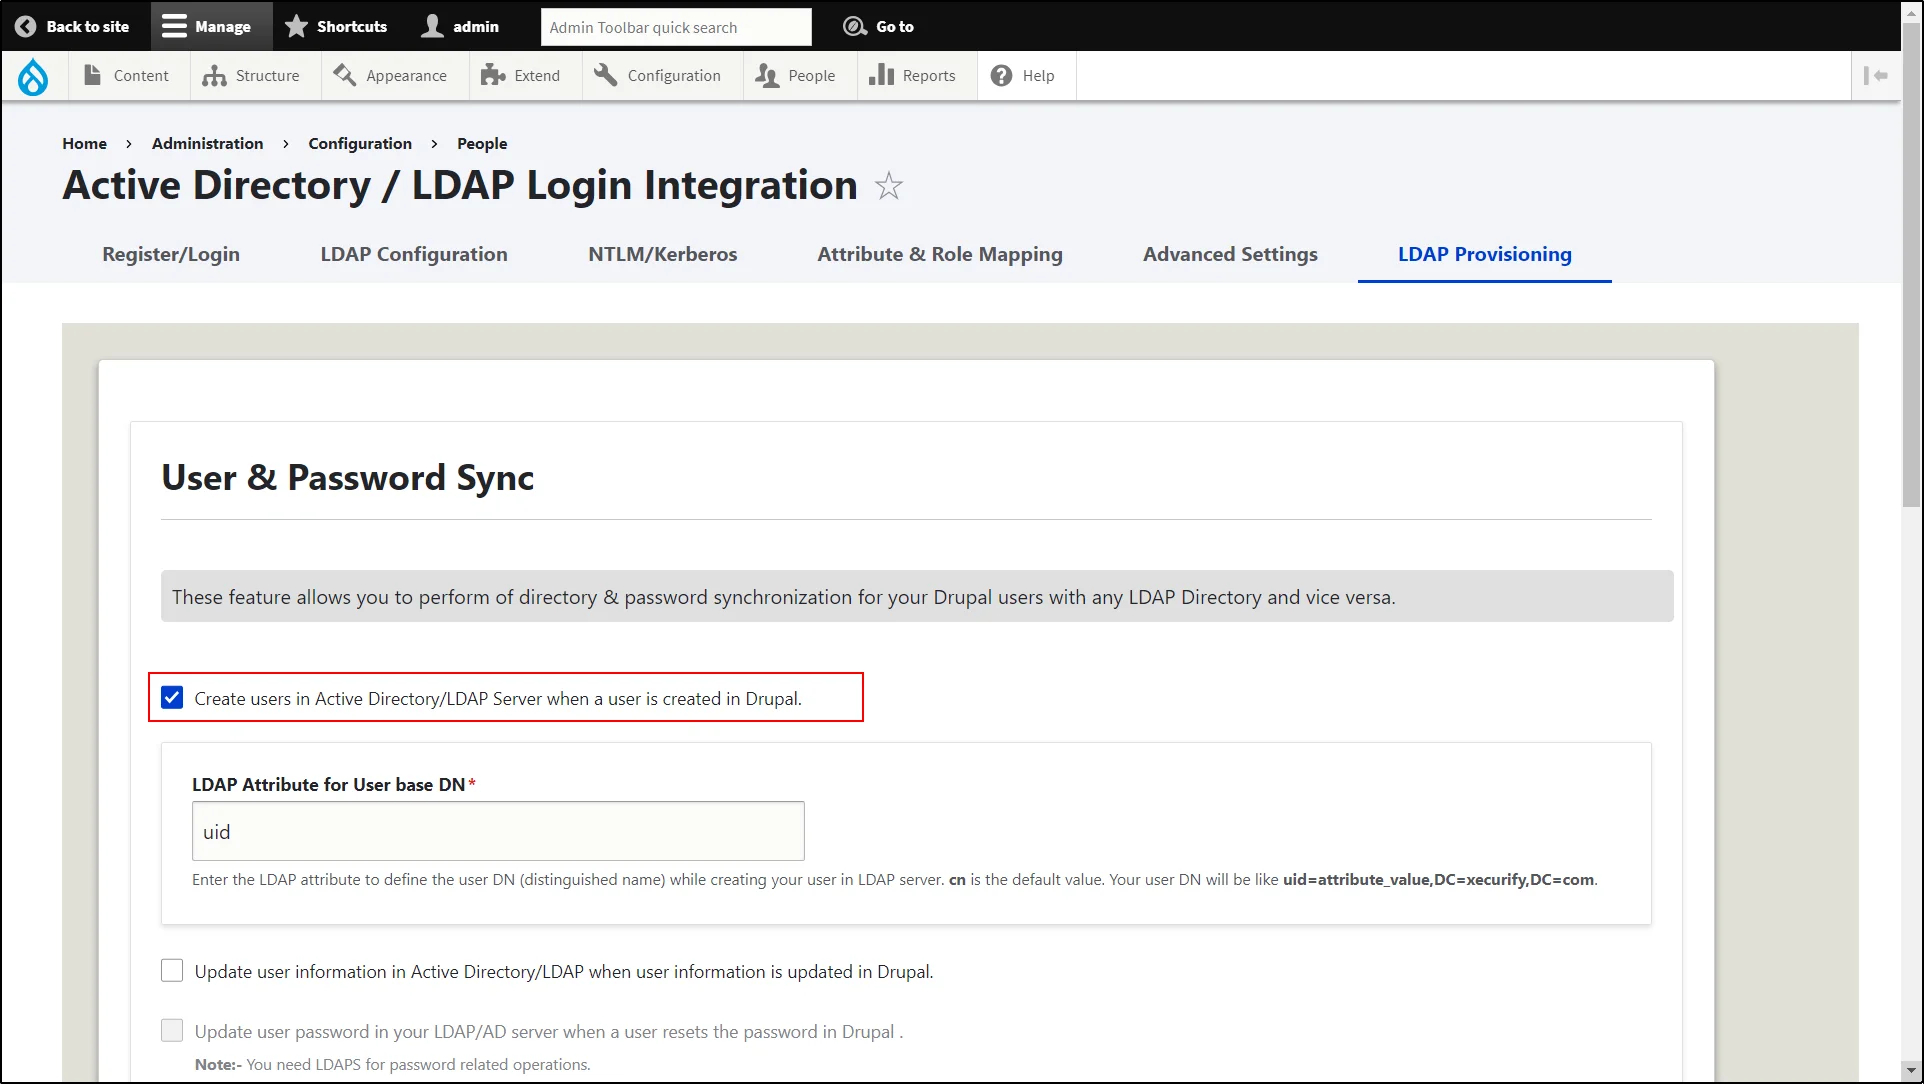 Drupal LDAP and Active Directory - Enabling the checkbox of Create user in Active Directory/LDAP Server